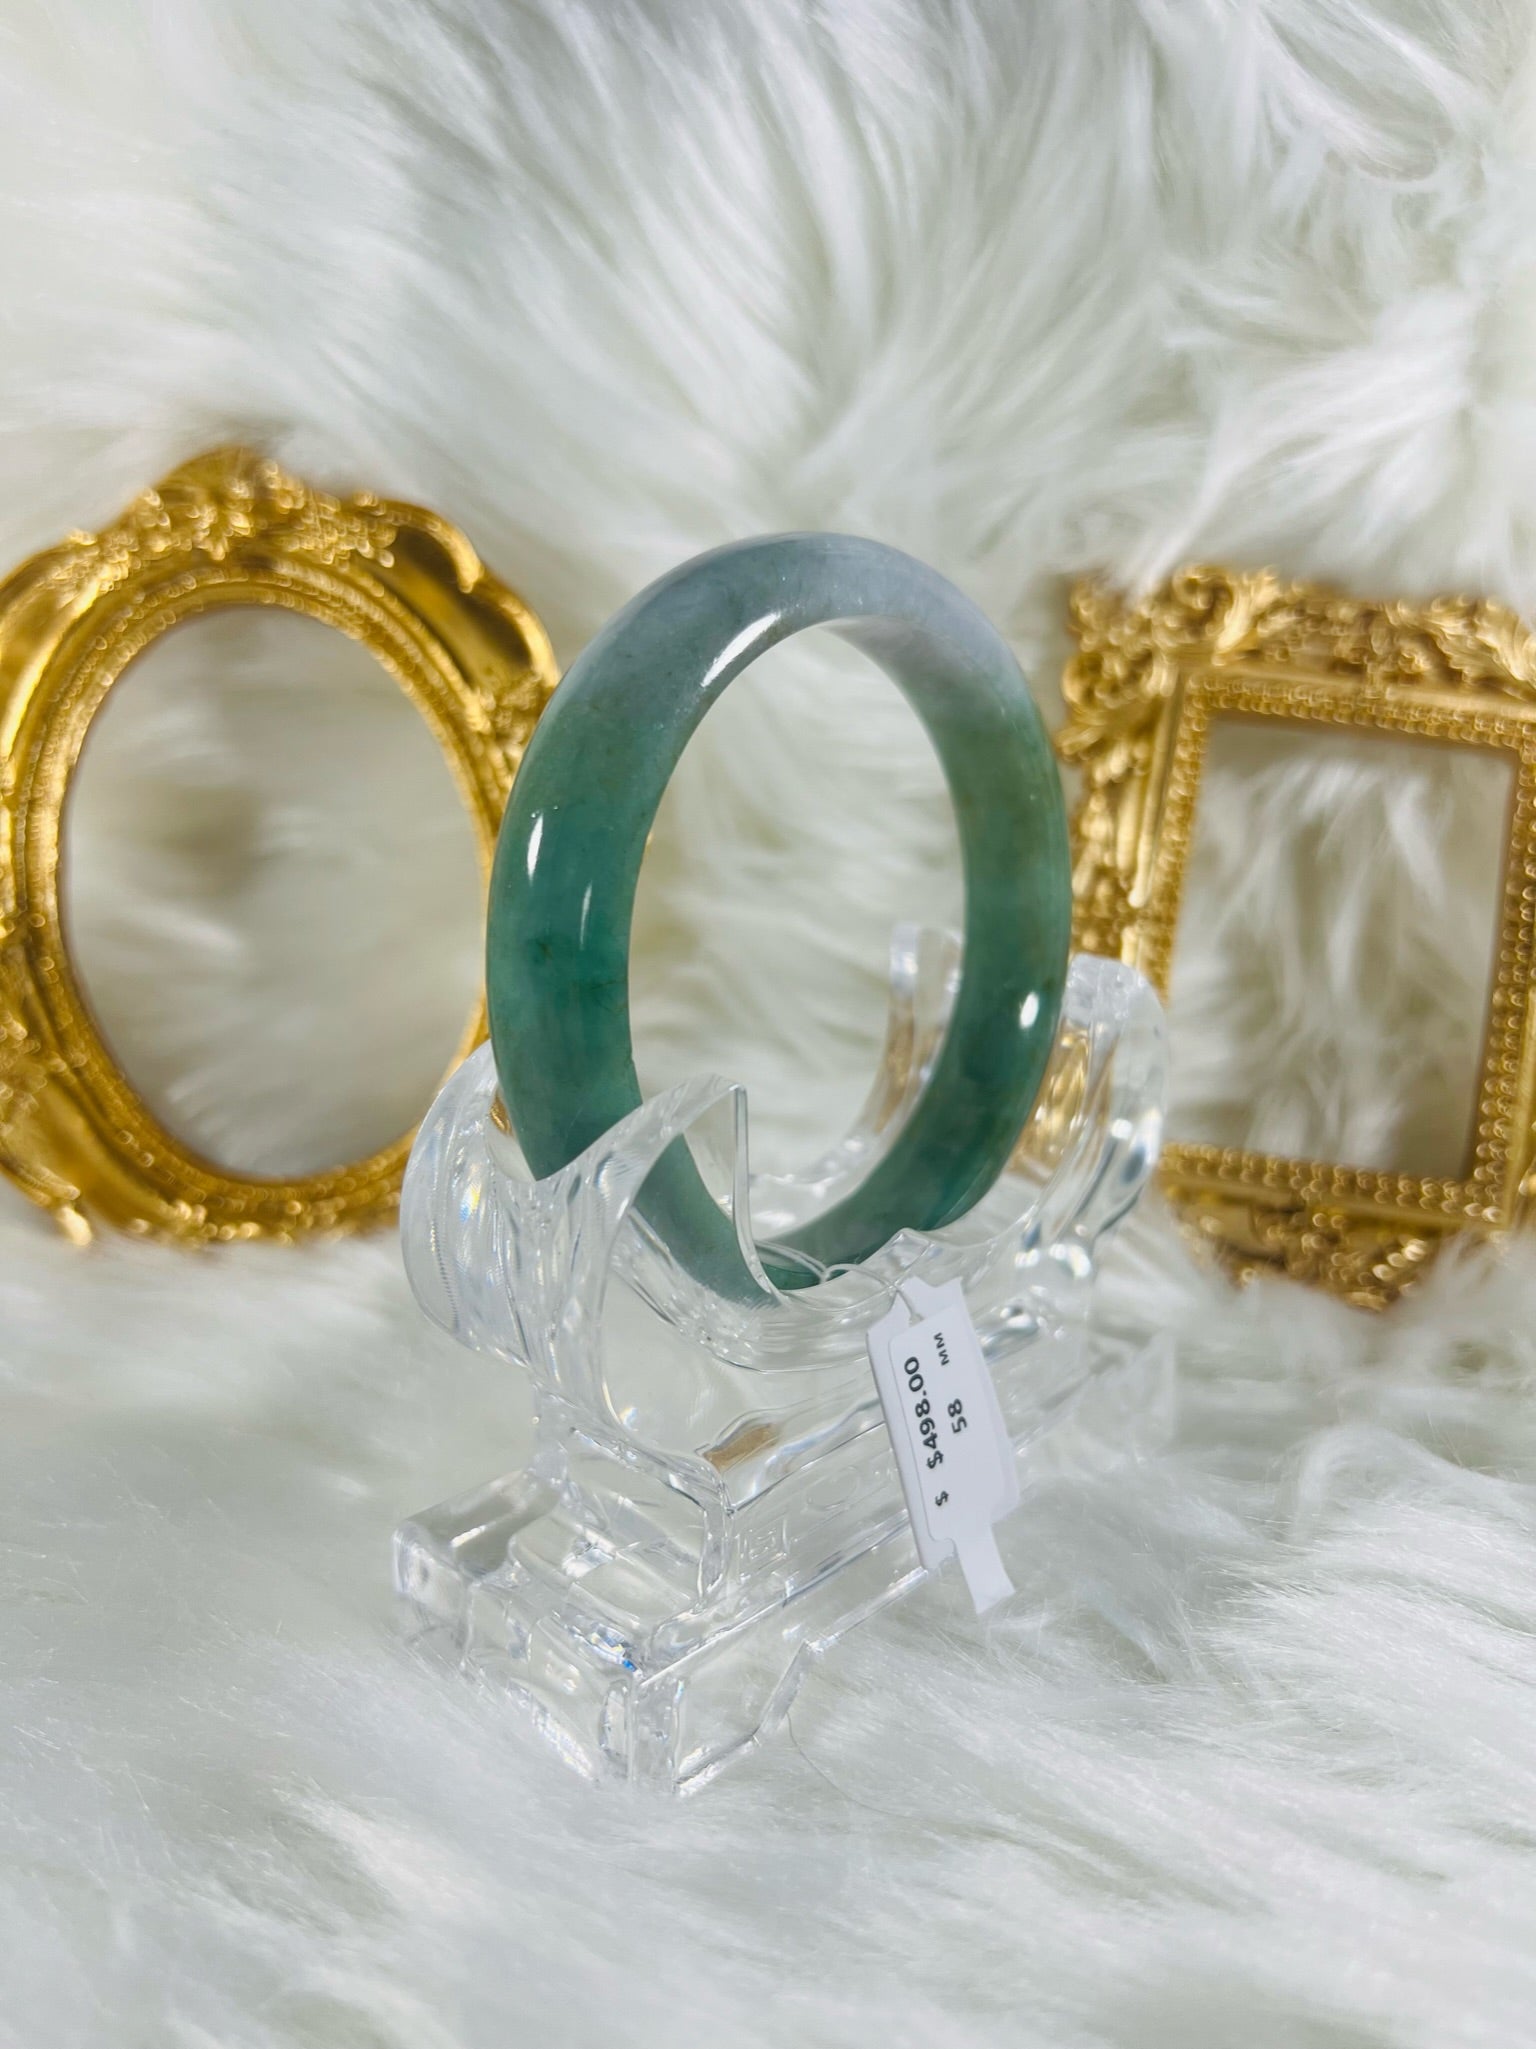 Grade A Natural Jade Bangle with certificate #37090